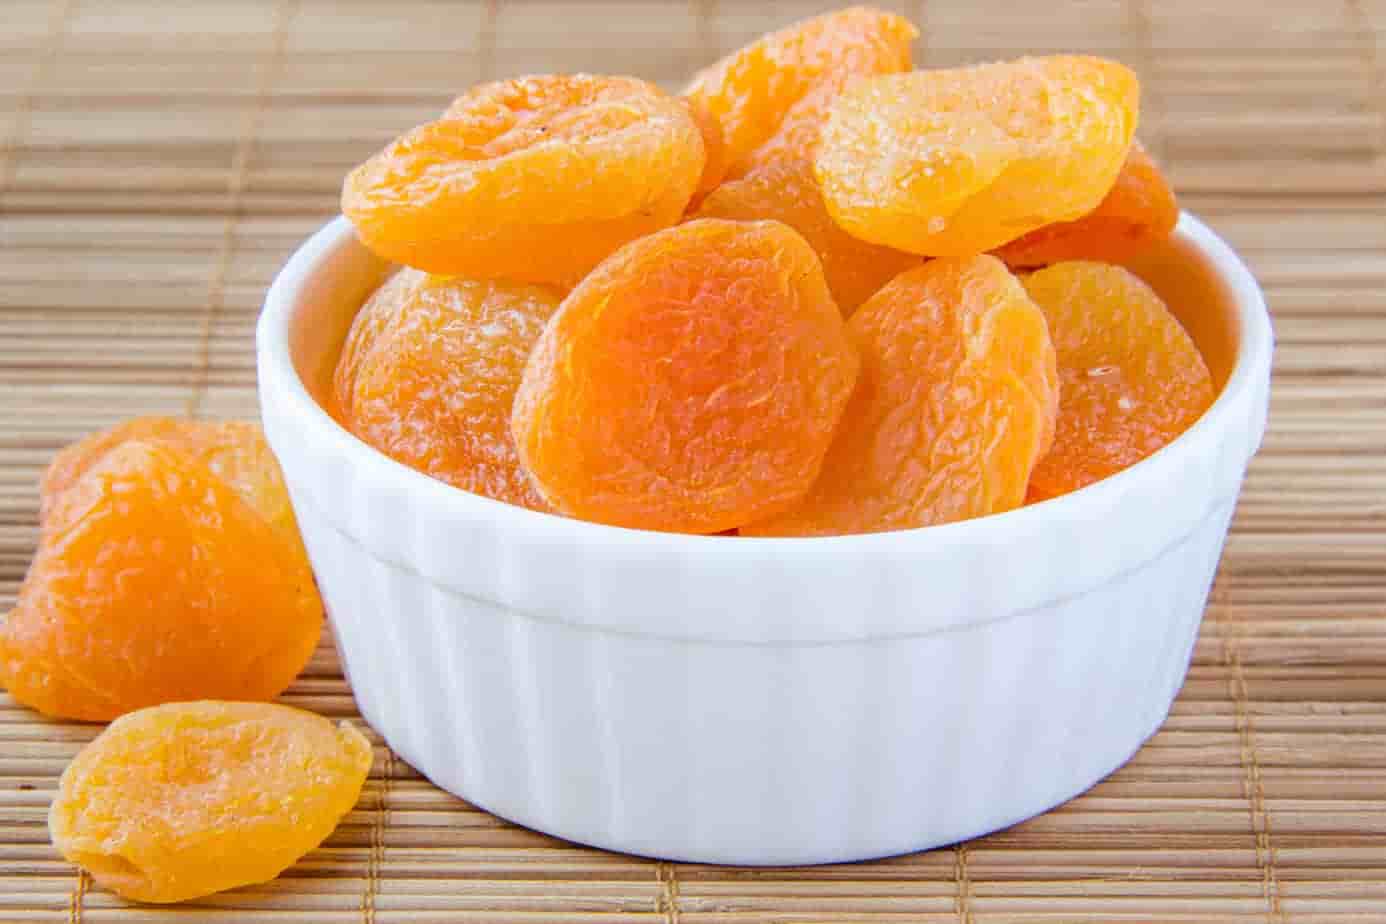 The features of dried apricot